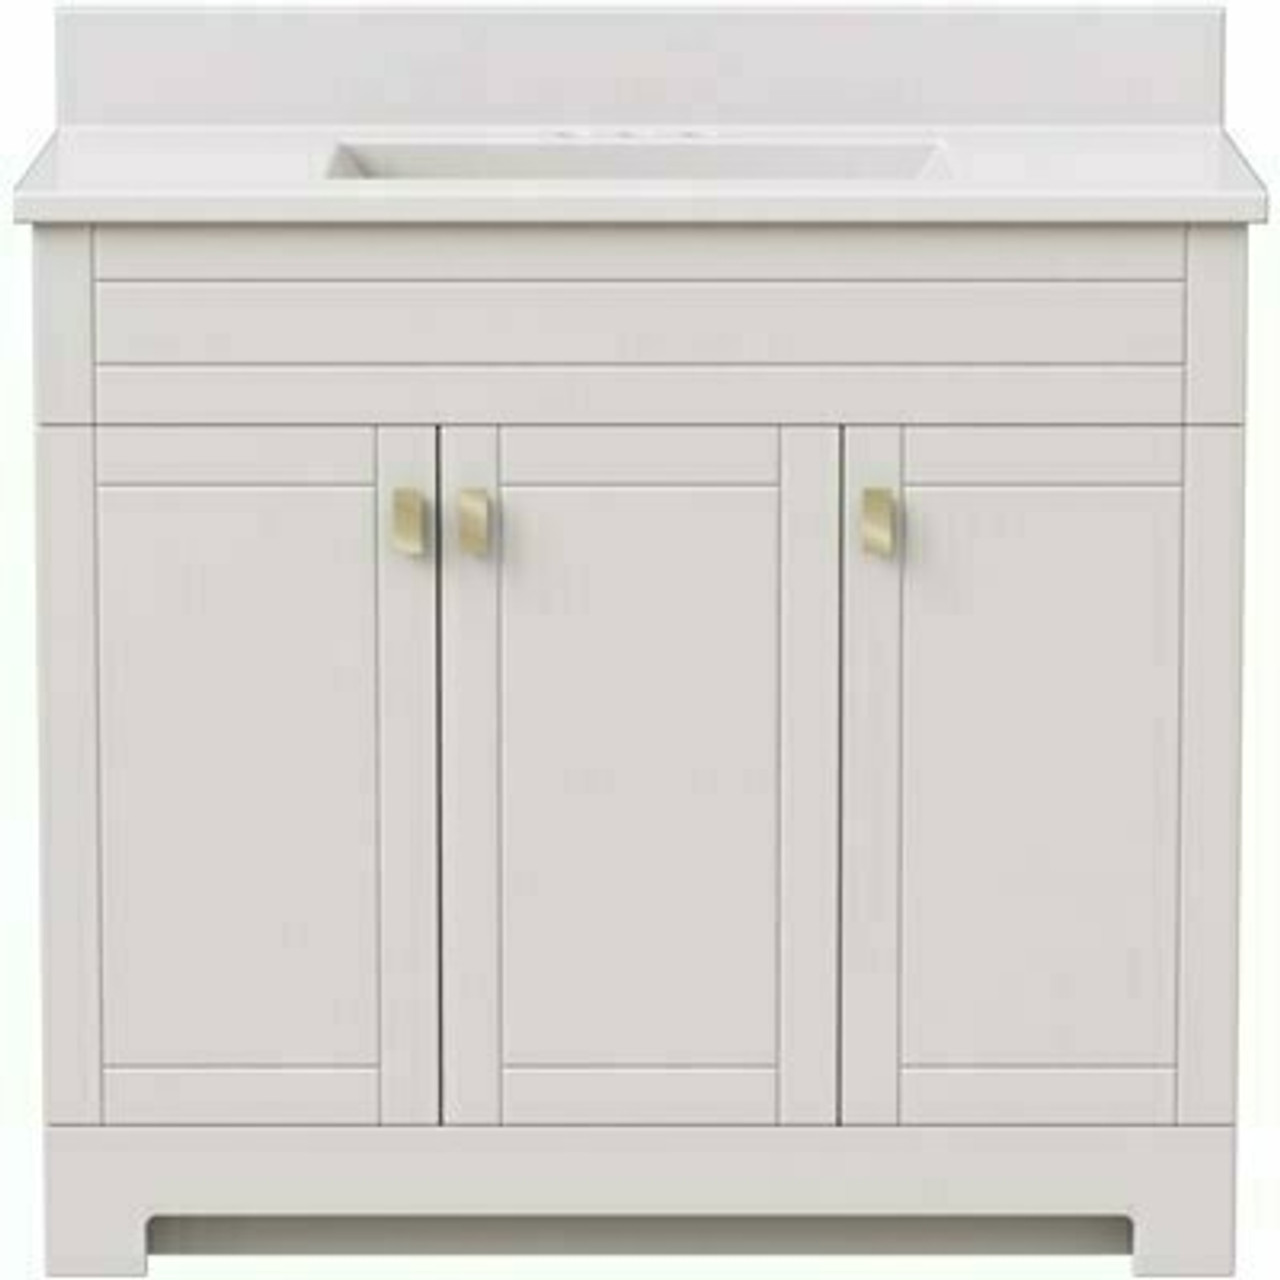 Canberra 37 In. W X 19 In. D Bath Vanity In Vanilla White With Cultured Marble Vanity Top In White With White Basin